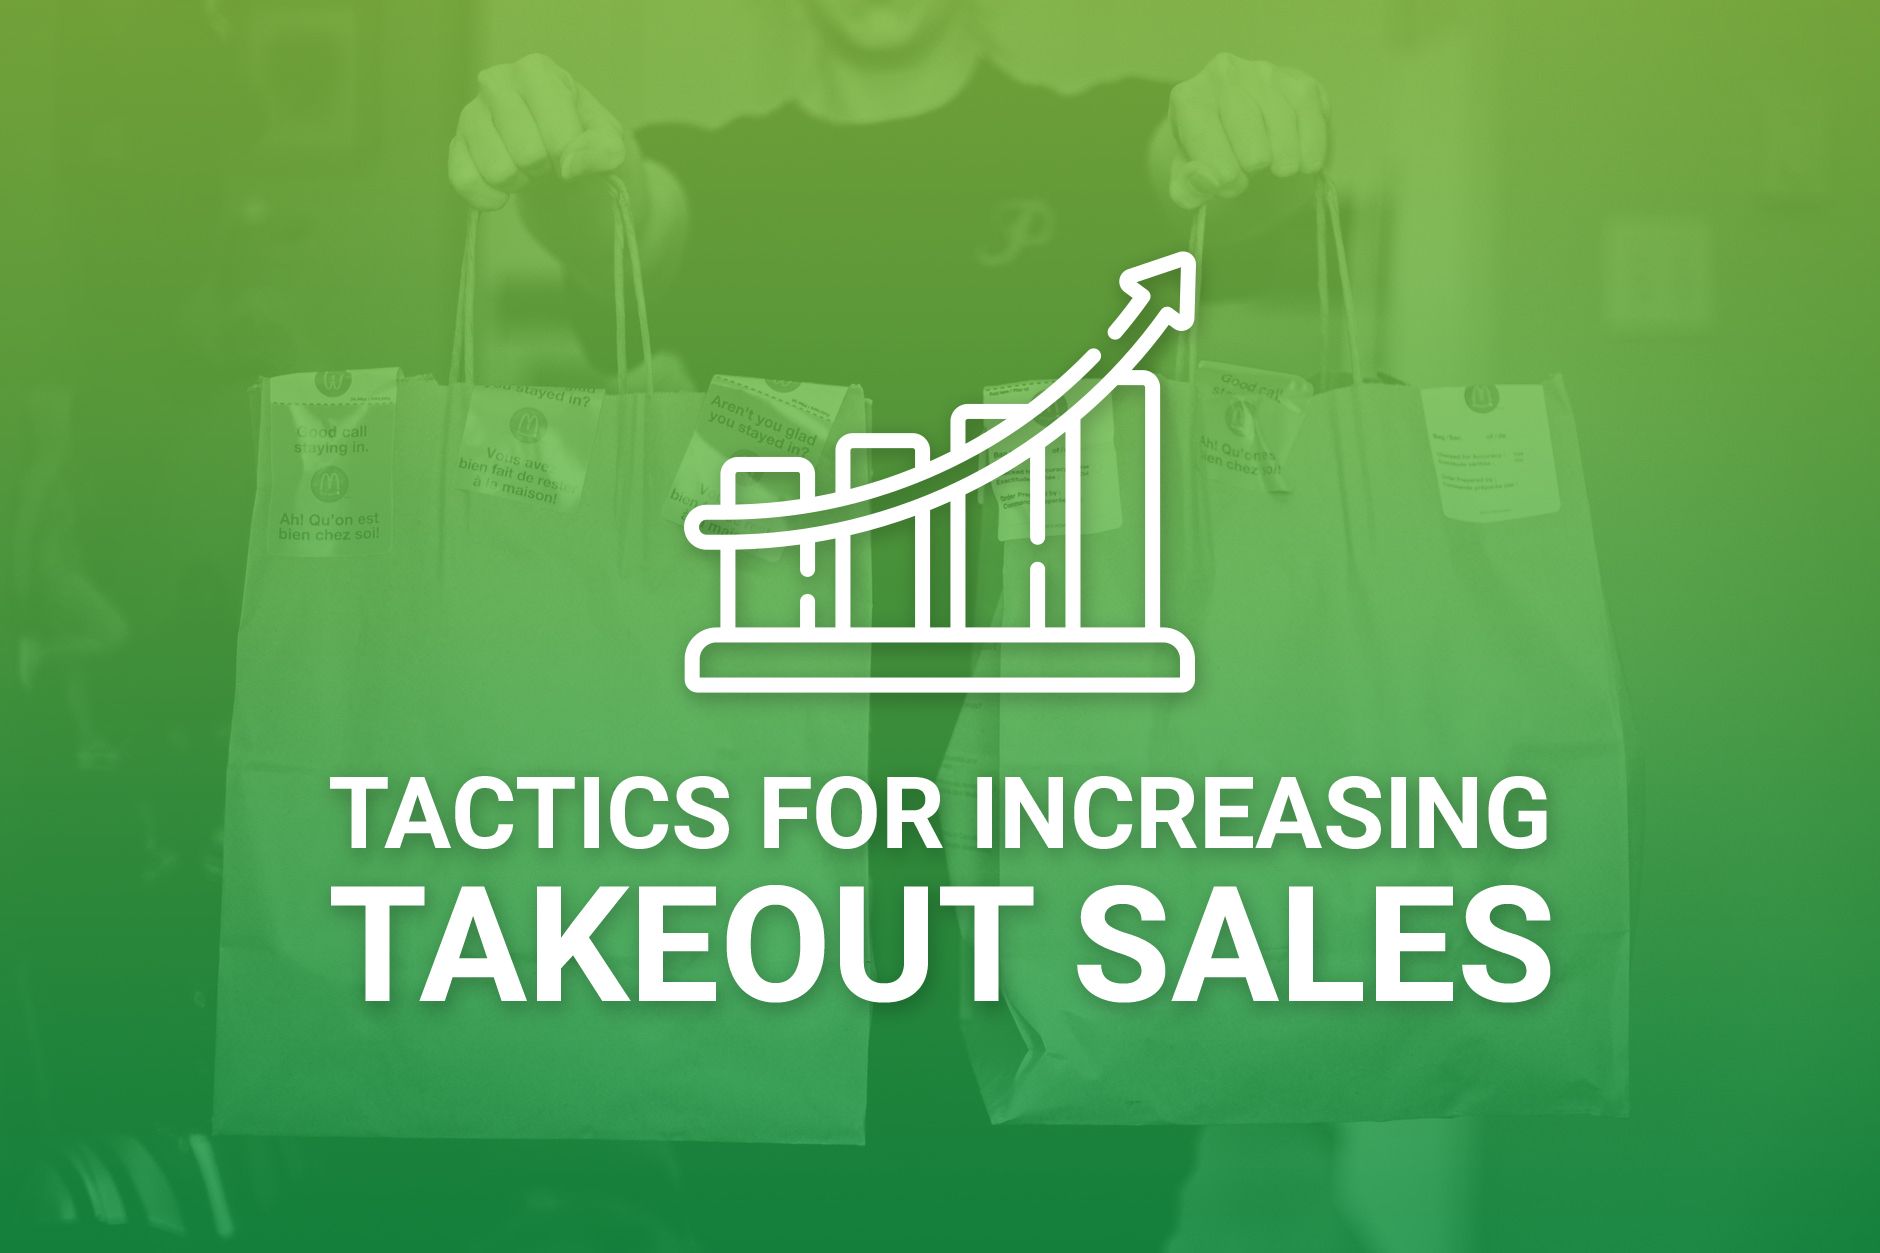 Increase Takeout Sales